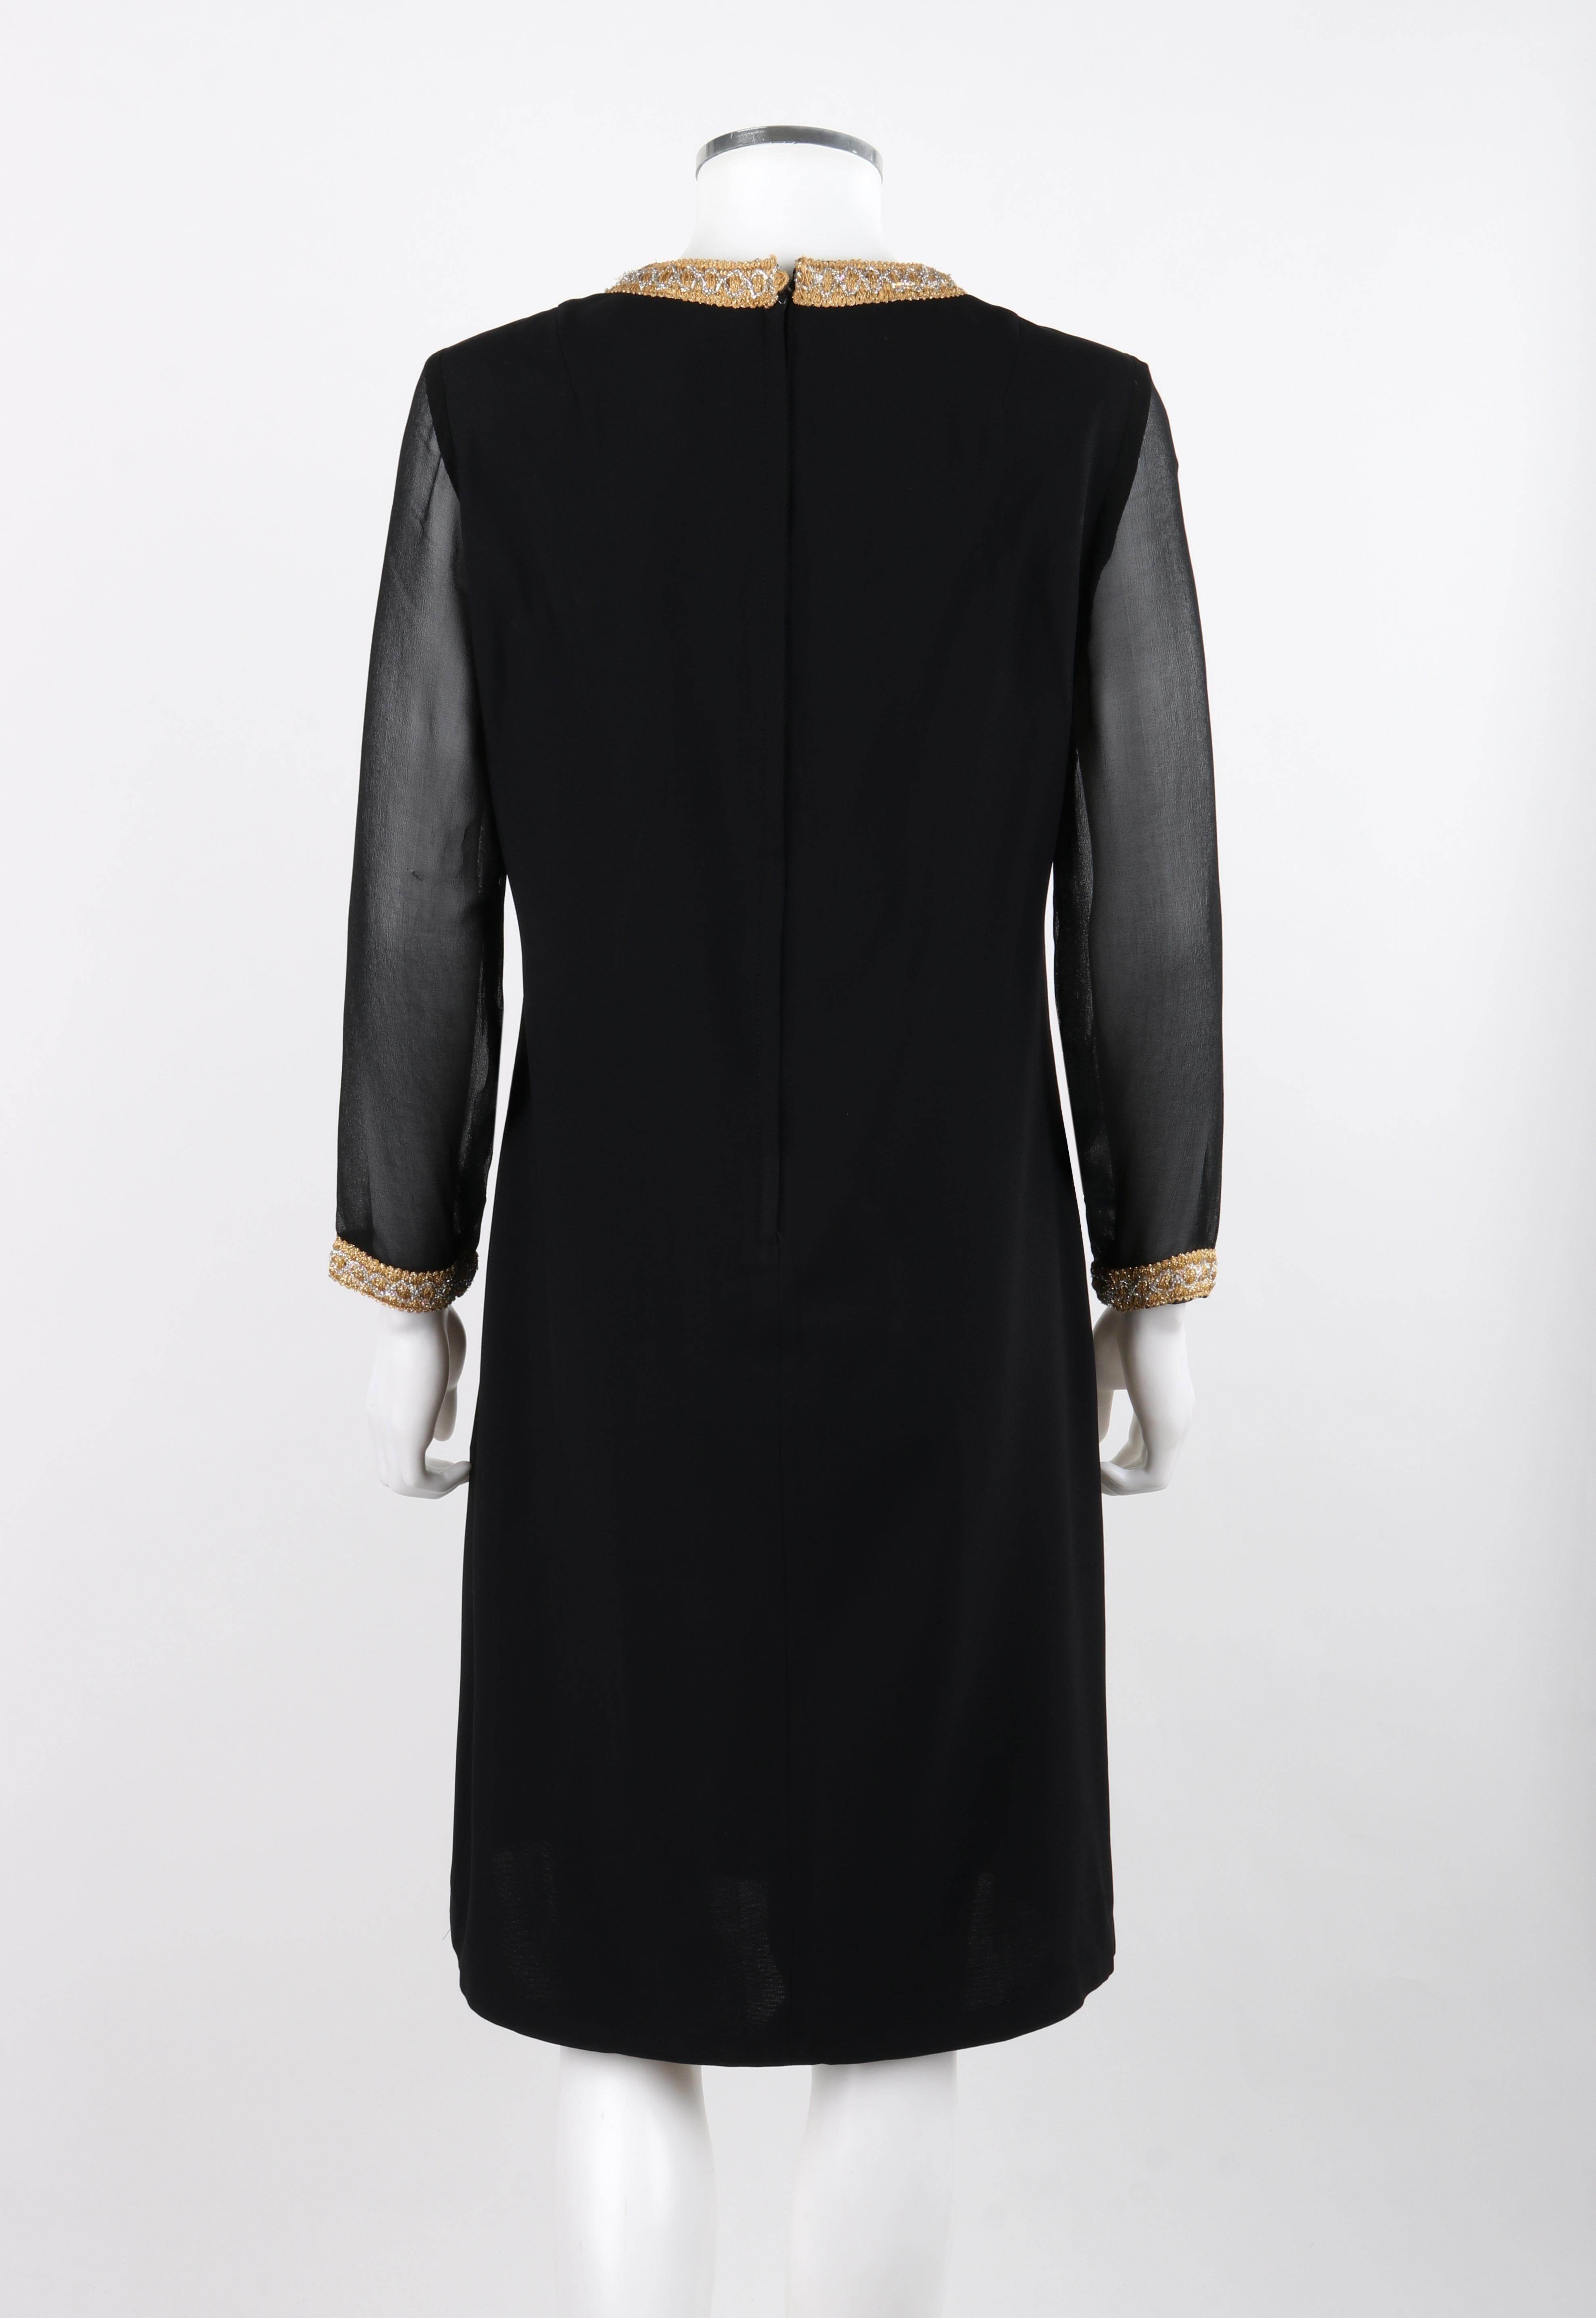 GLORIA SWANSON Puritan Forever Young c.1960's Black Gold Sheer Sleeve Dress For Sale 1